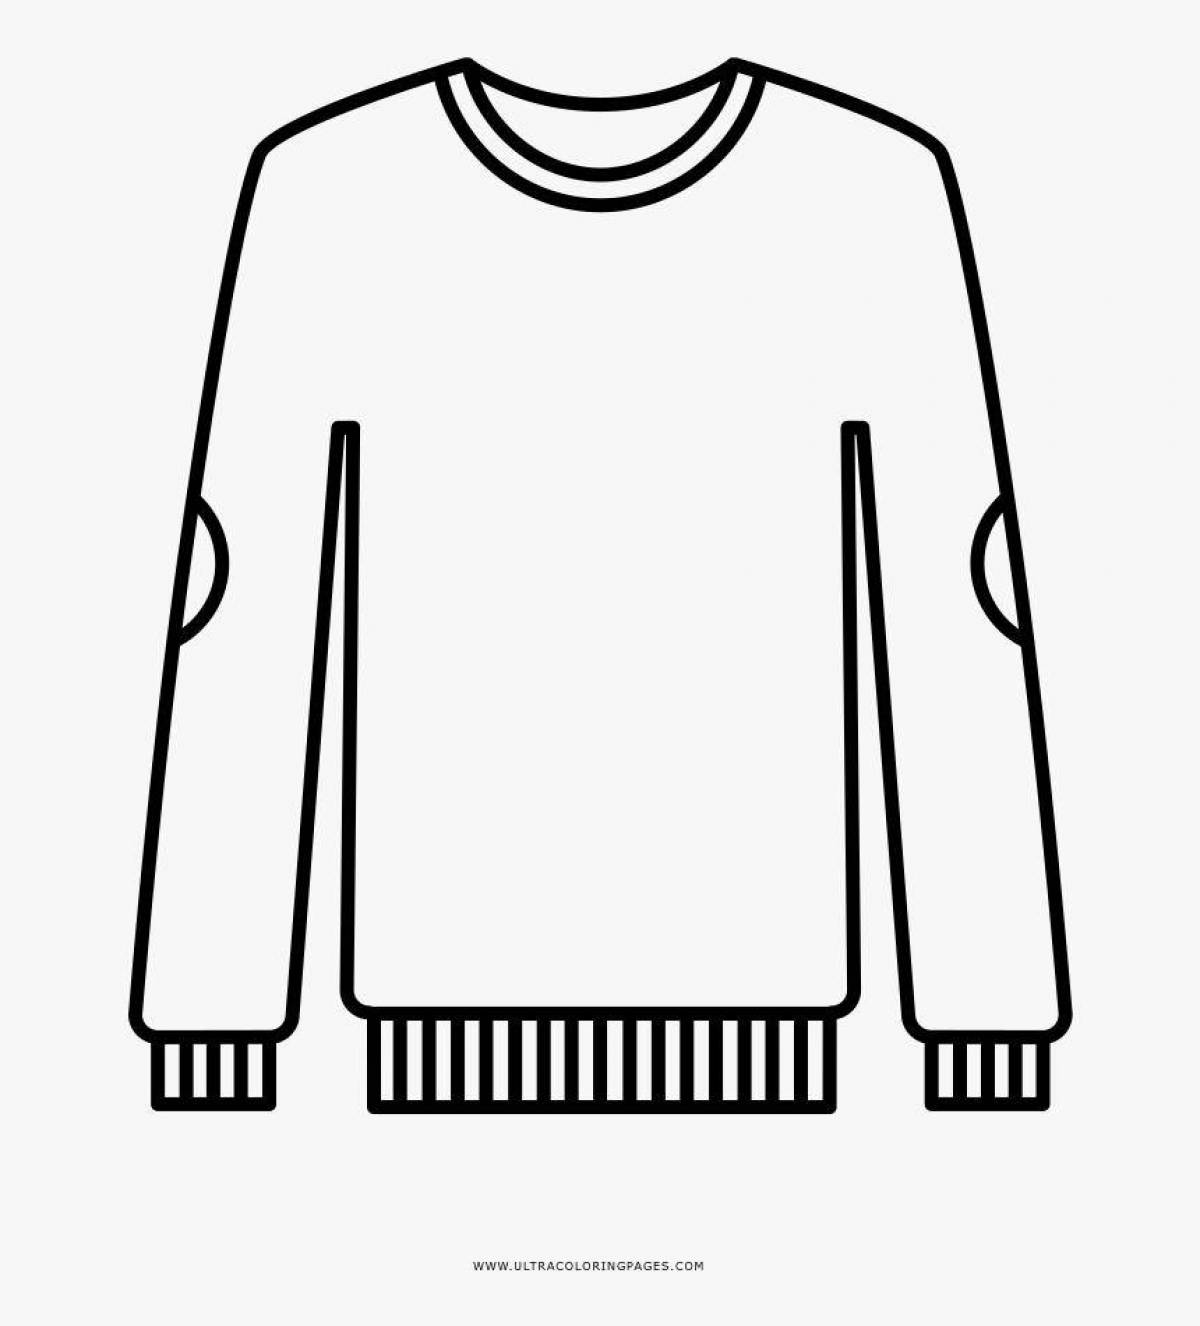 Coloring page magic sweater for children 4-5 years old